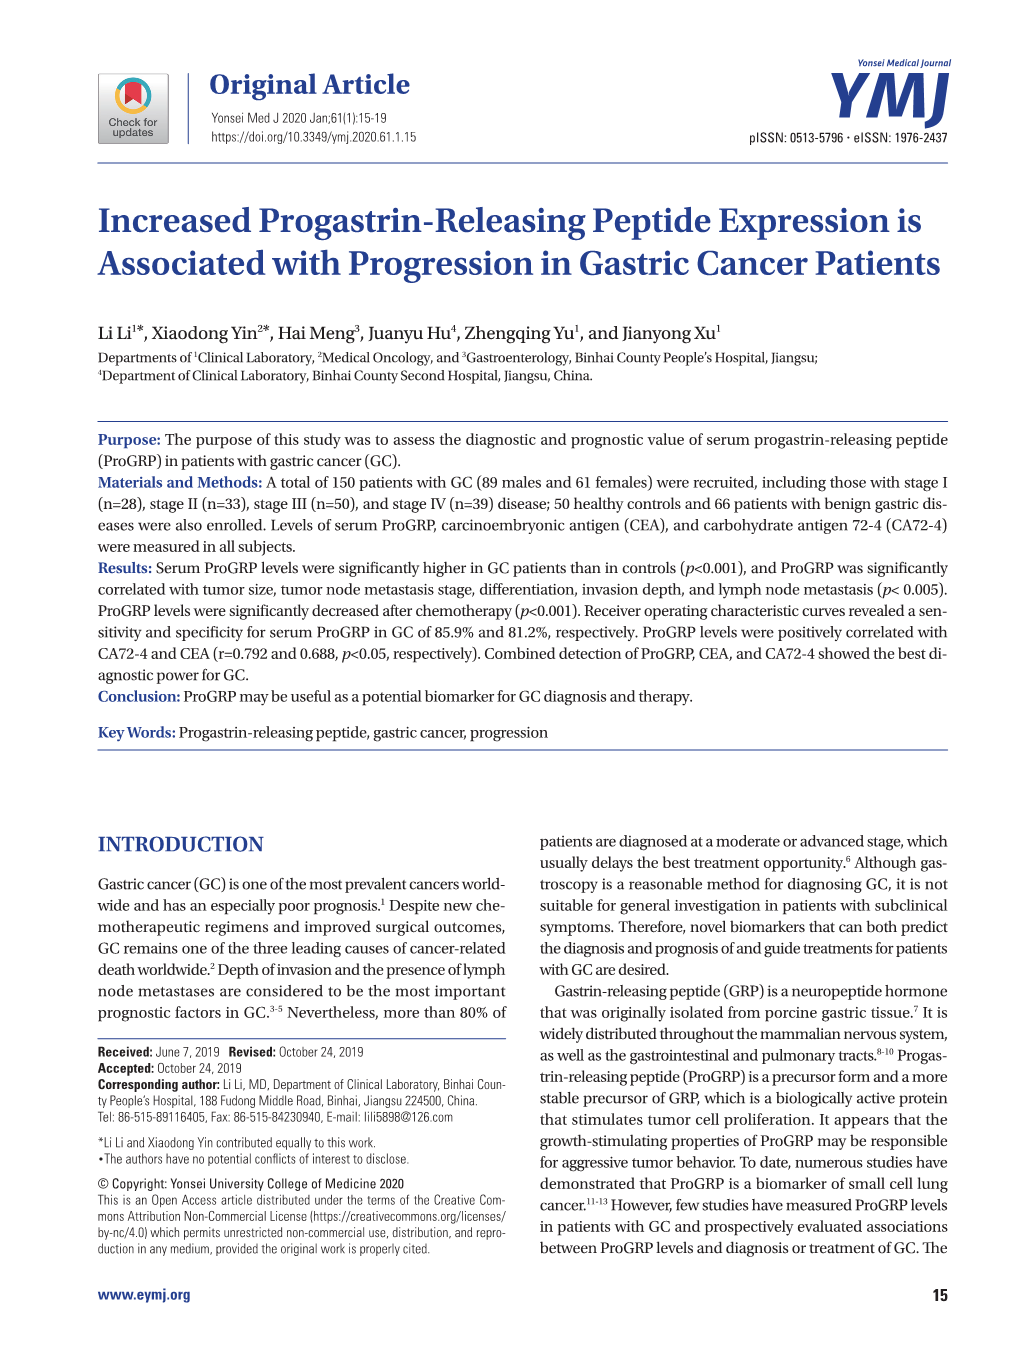 Increased Progastrin-Releasing Peptide Expression Is Associated with Progression in Gastric Cancer Patients